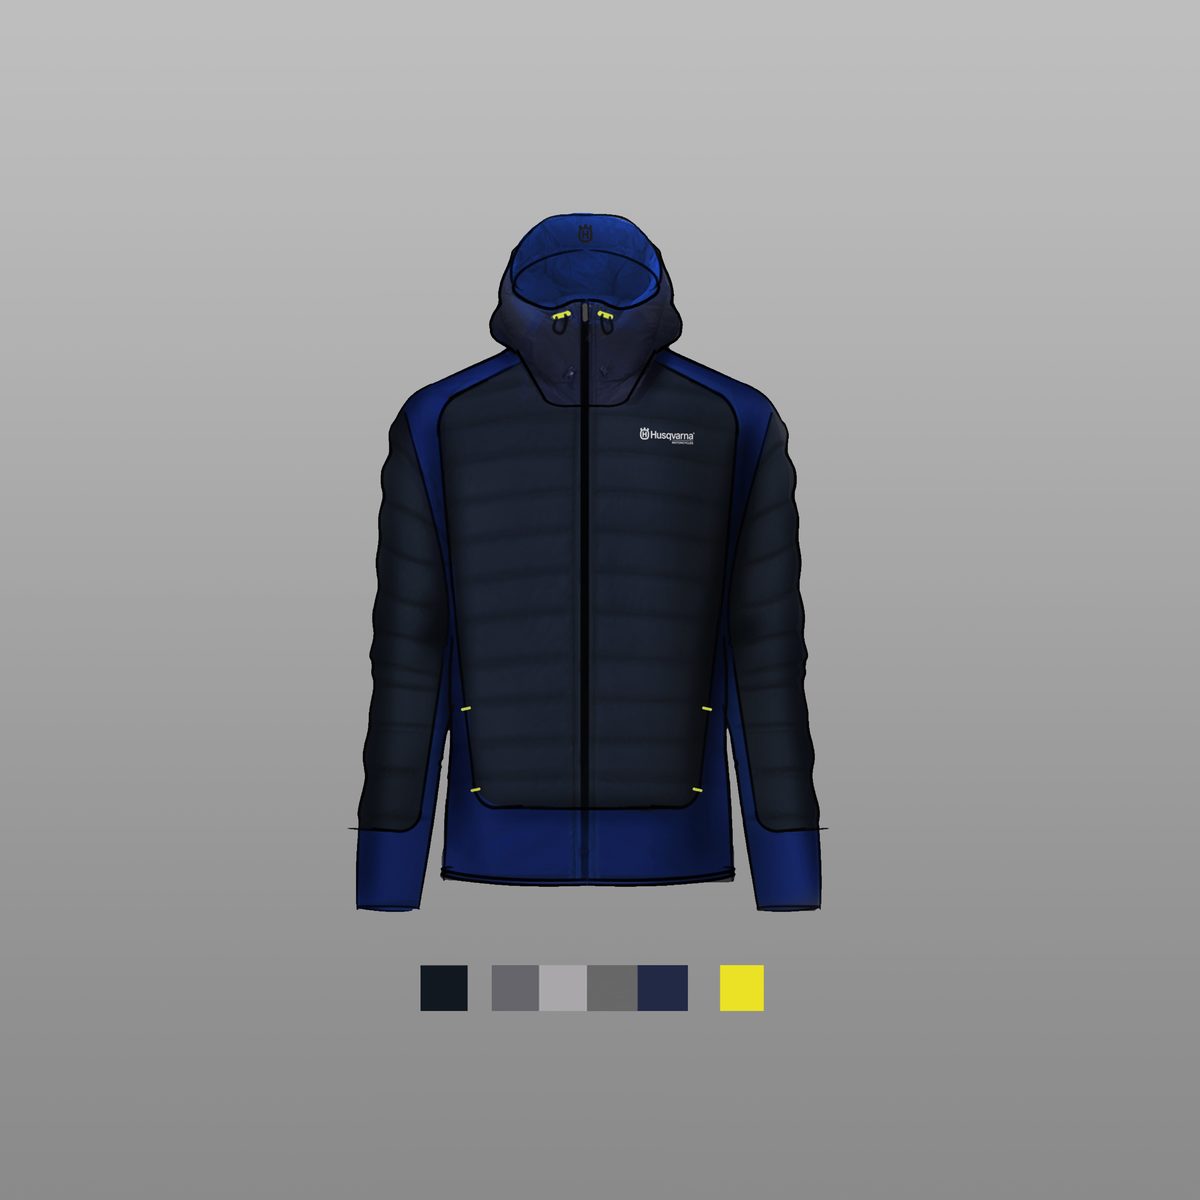 Apparel design and colour palette of jacket from Husqvarna Motorcycles street clothes collection